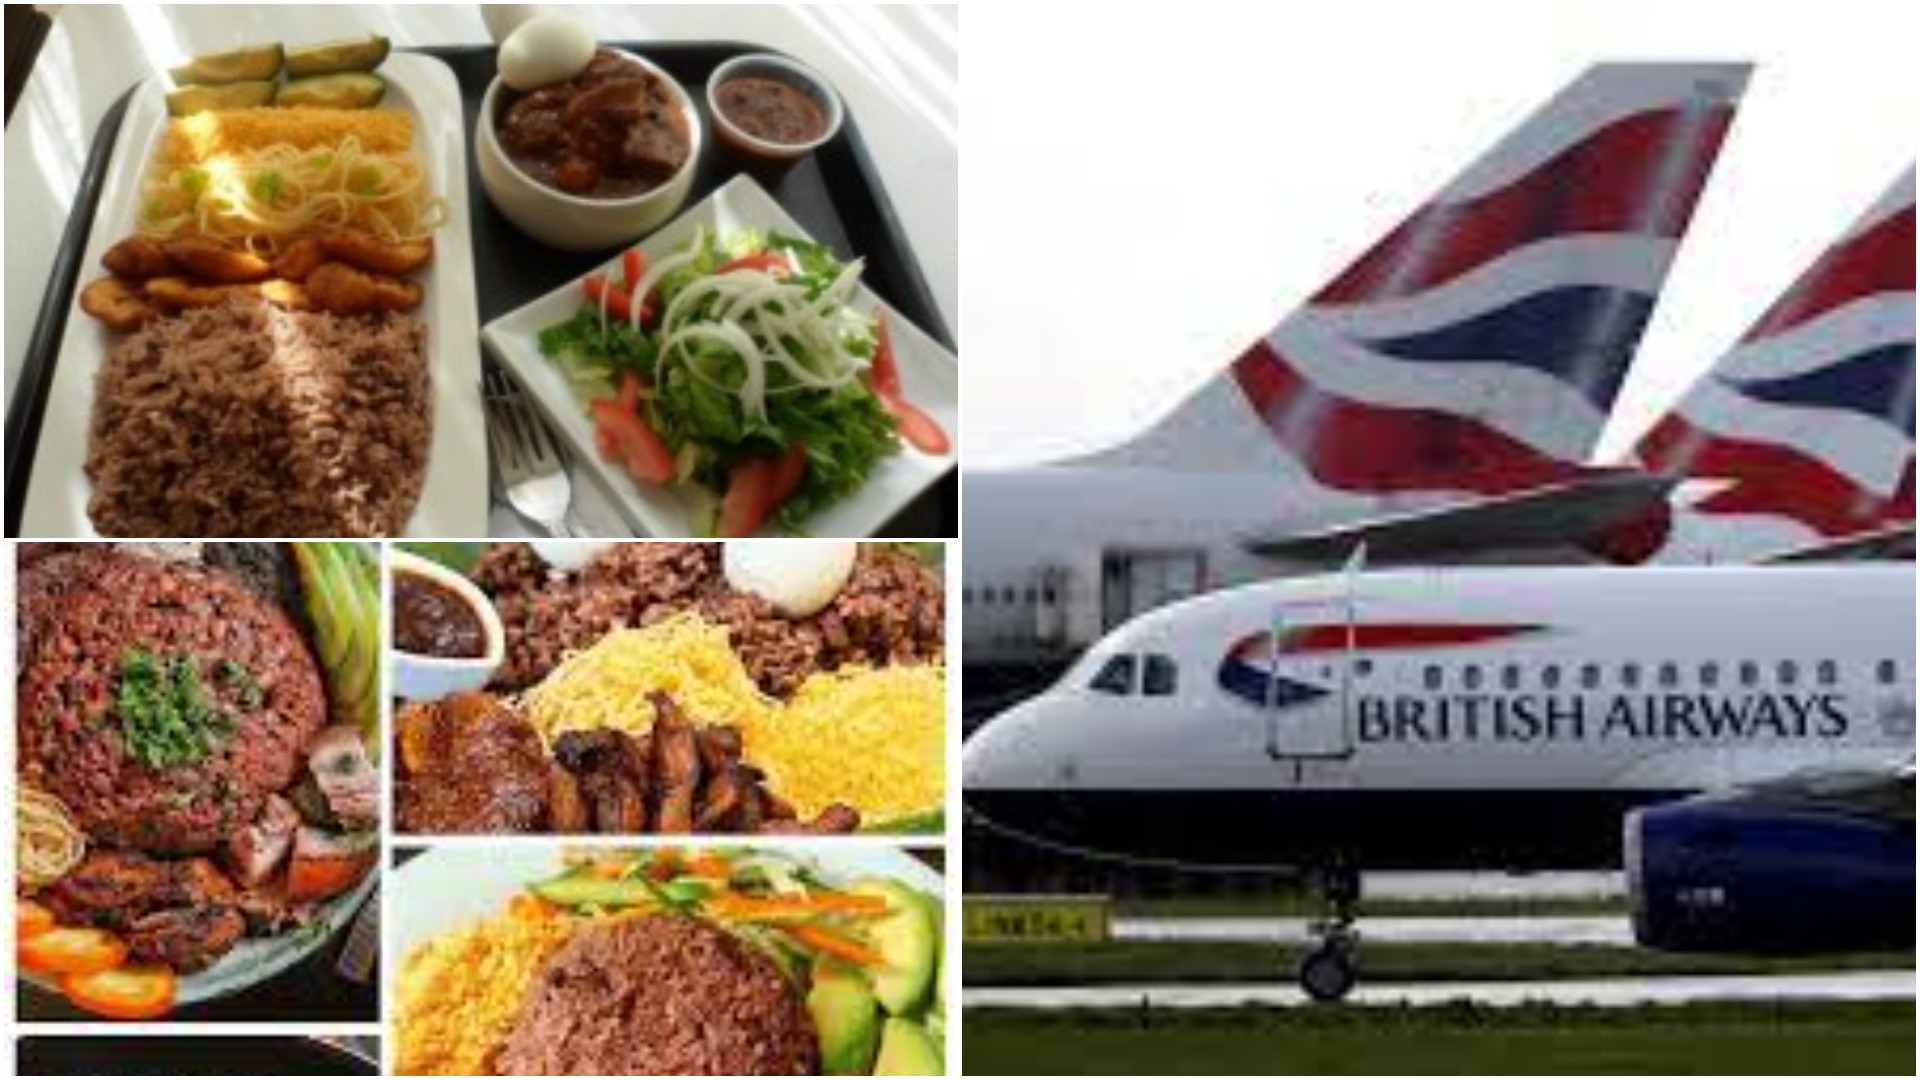 Ghanaians sign petition demanding British Airways to serve waakye, gob3 and other local food